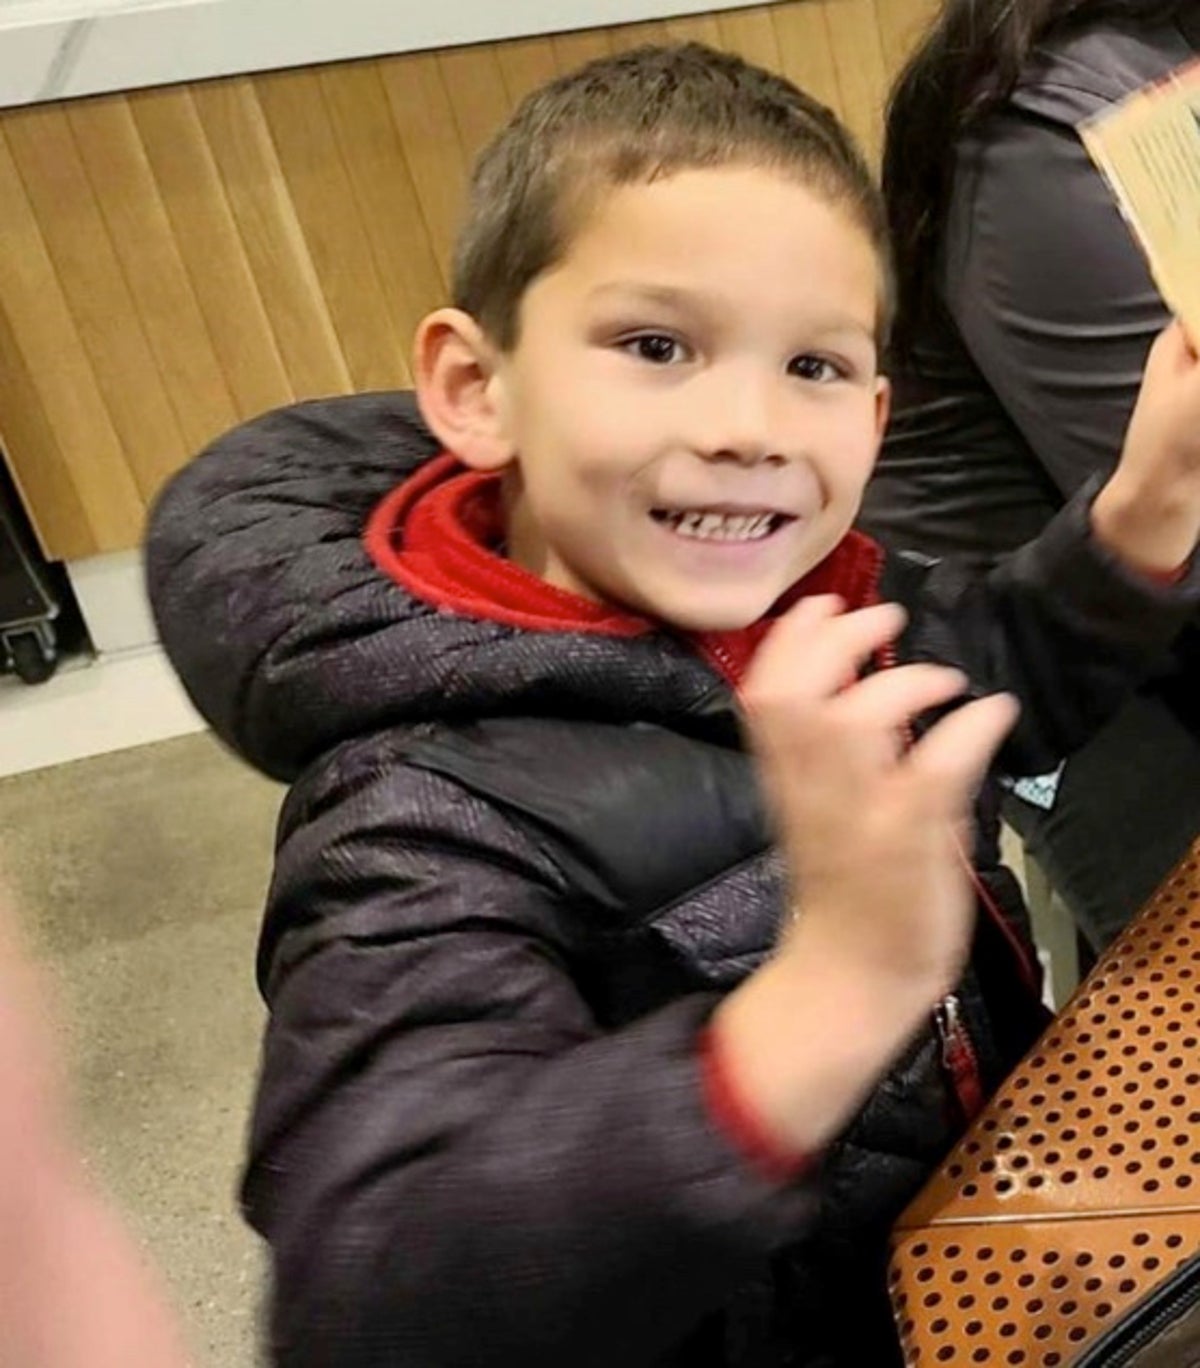 Parents describe horror of losing missing 5-year-old child Kyle Doan in California floods: ‘Hug your kids extra hard’